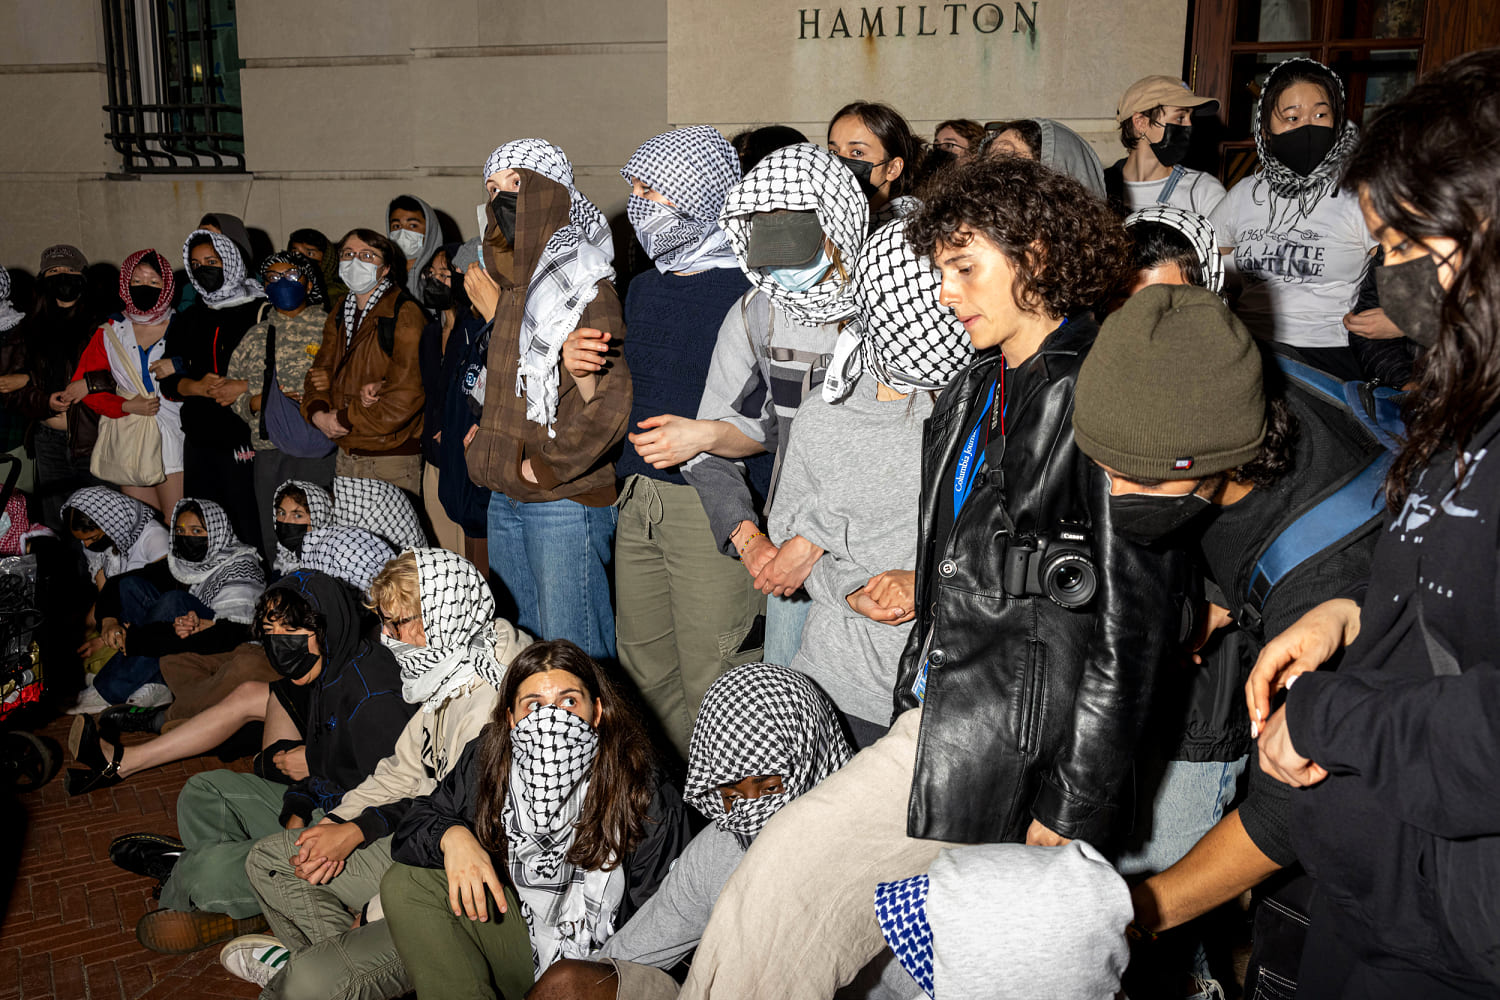 Palestinian students' complaint against Columbia sparks DOE civil rights investigation